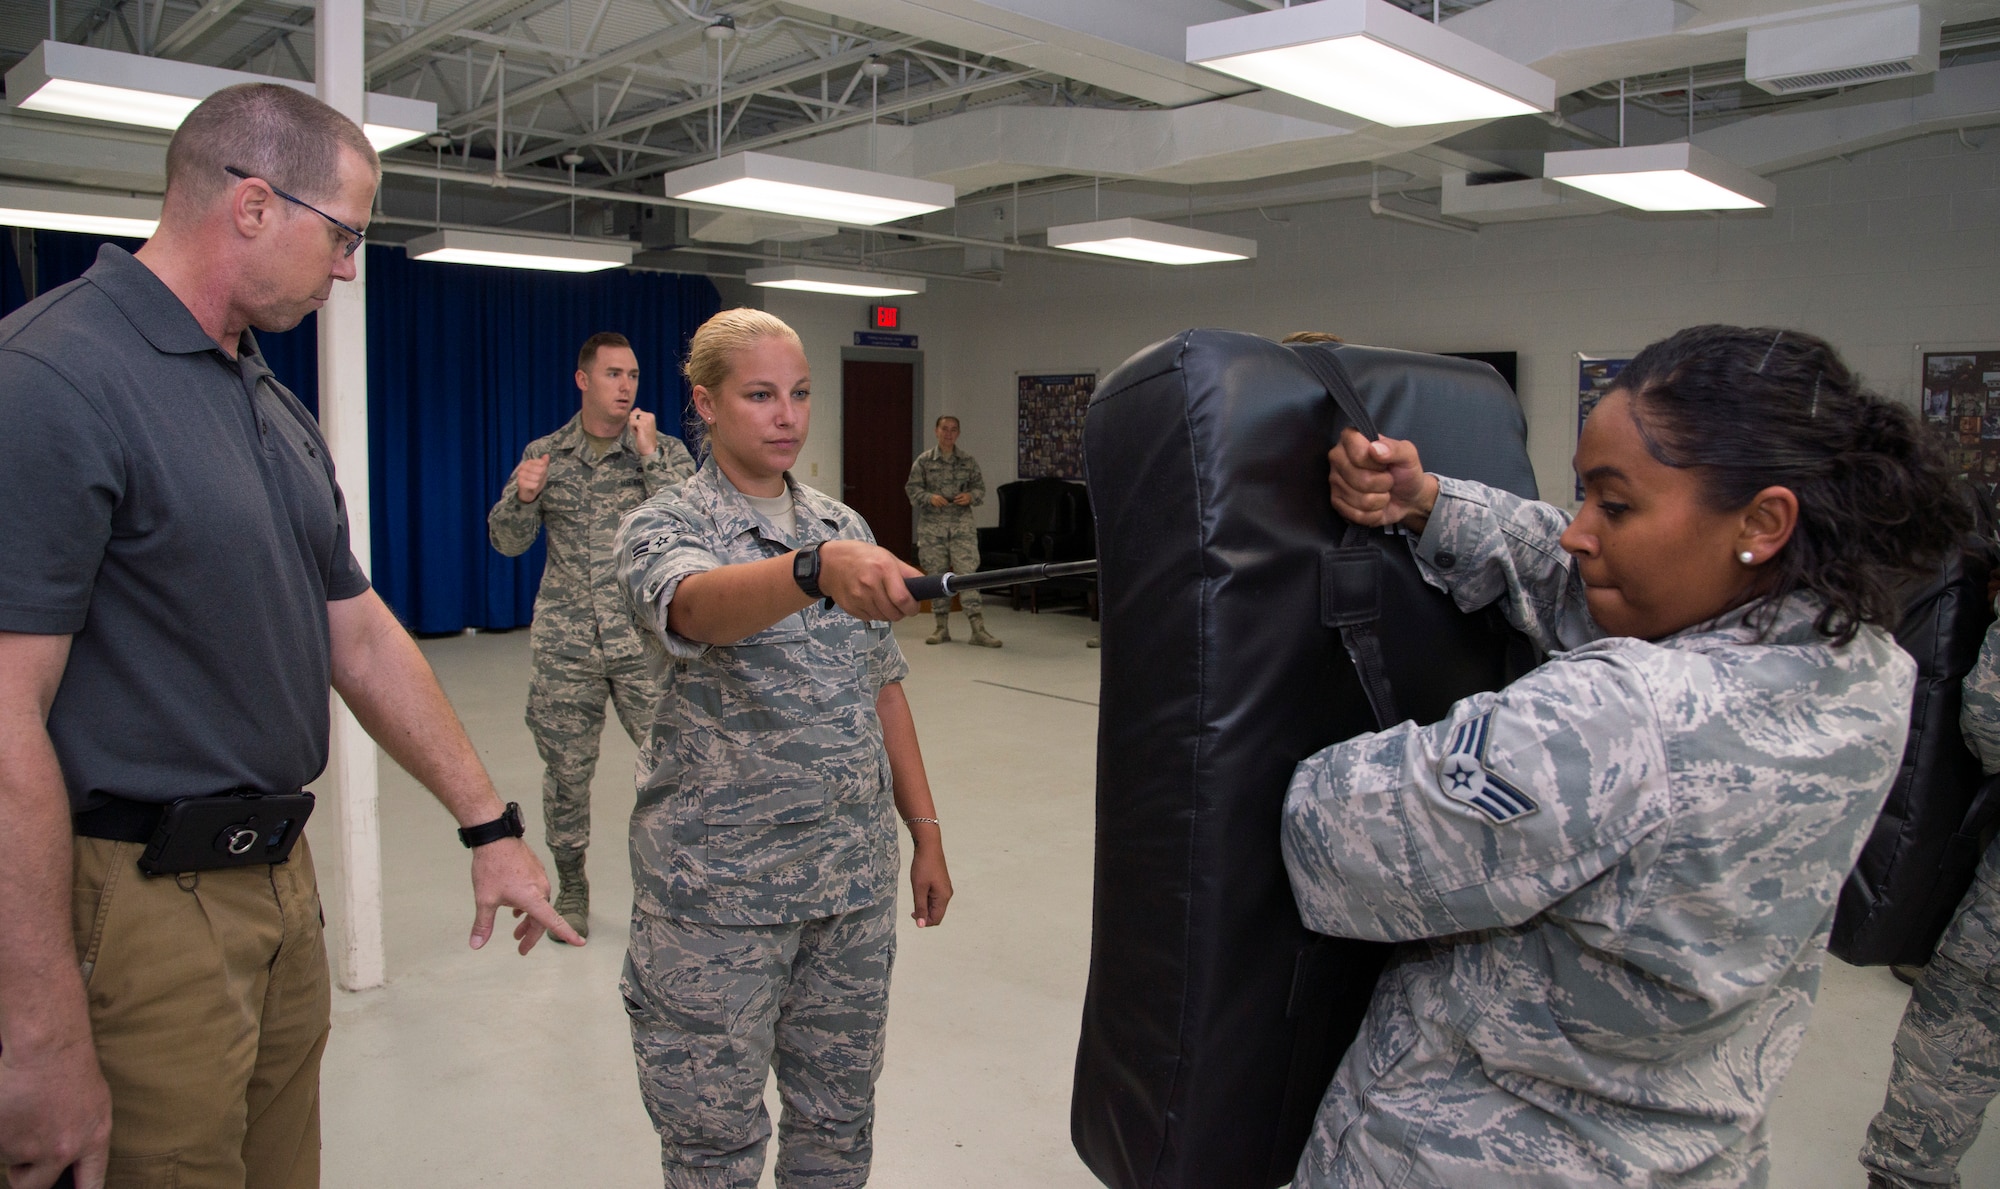 U.S. Air Force Airman 1st Class Casey Atanasio, center, a patient travel coordinator assigned to the 6th Medical Support Squadron, learns proper distance and form for baton strikes at MacDill Air Force Base, Fla., July 25, 2018.